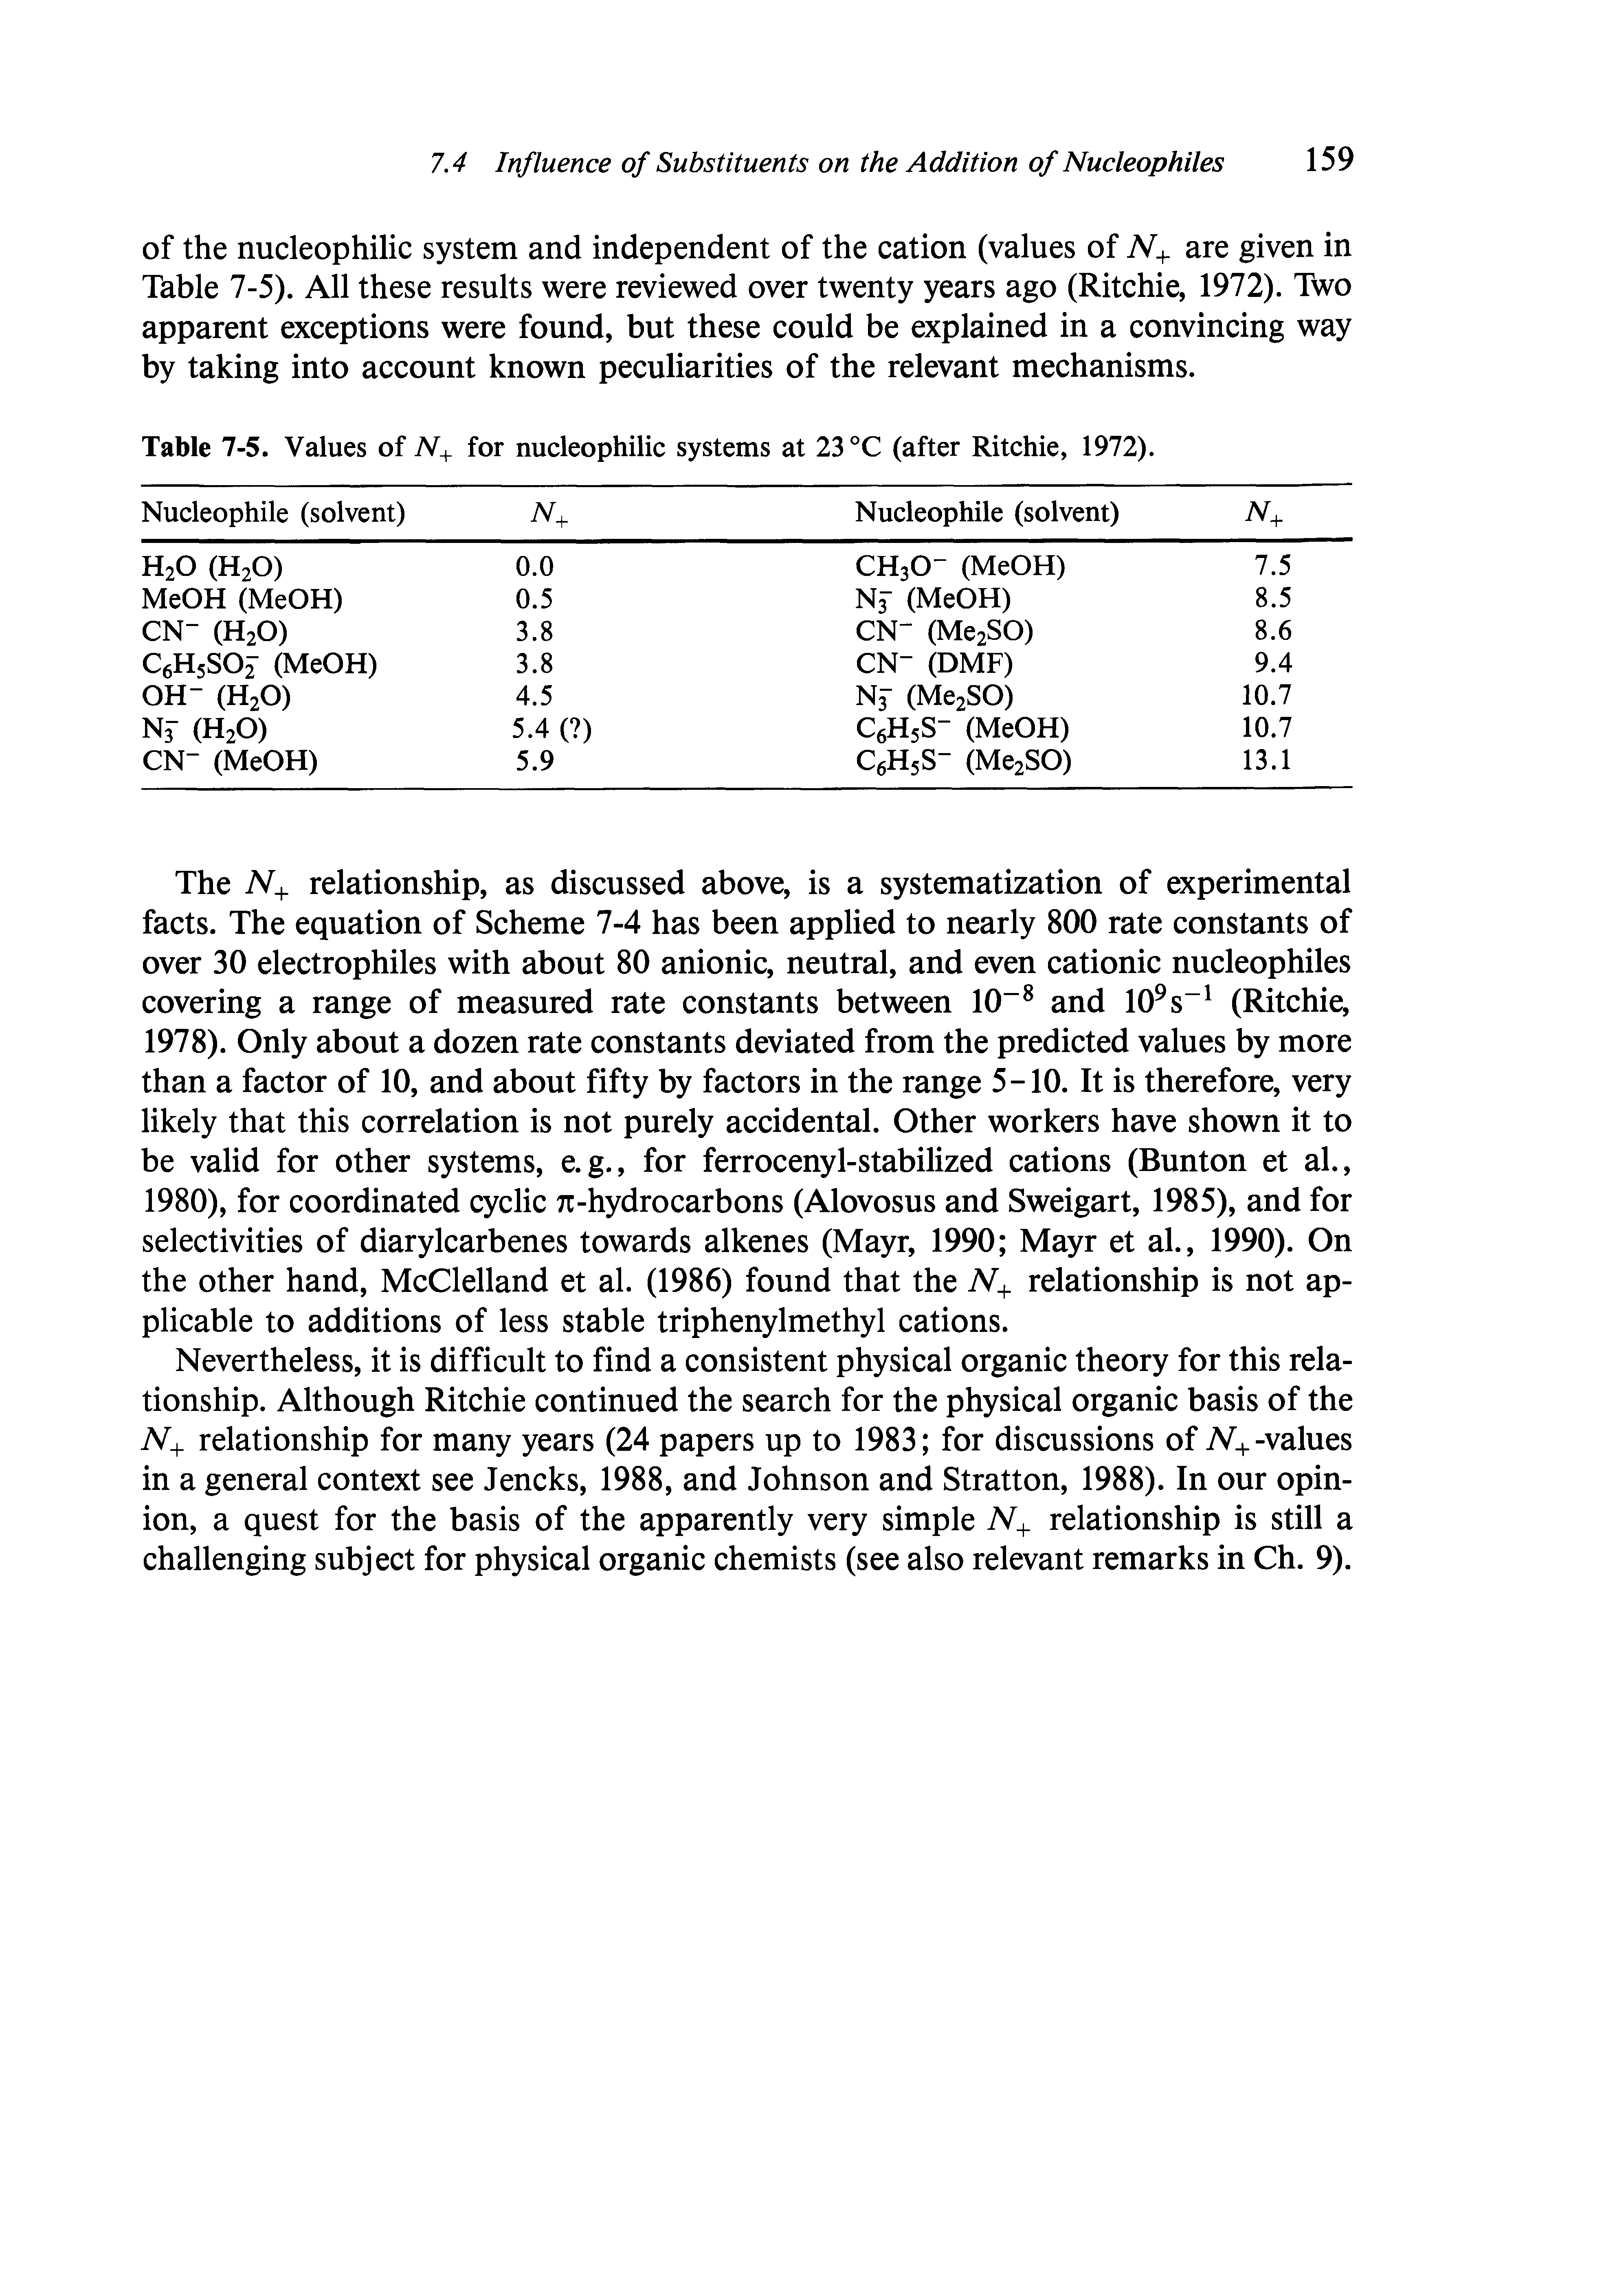 Table 7-5. Values of N+ for nucleophilic systems at 23 °C (after Ritchie, 1972).